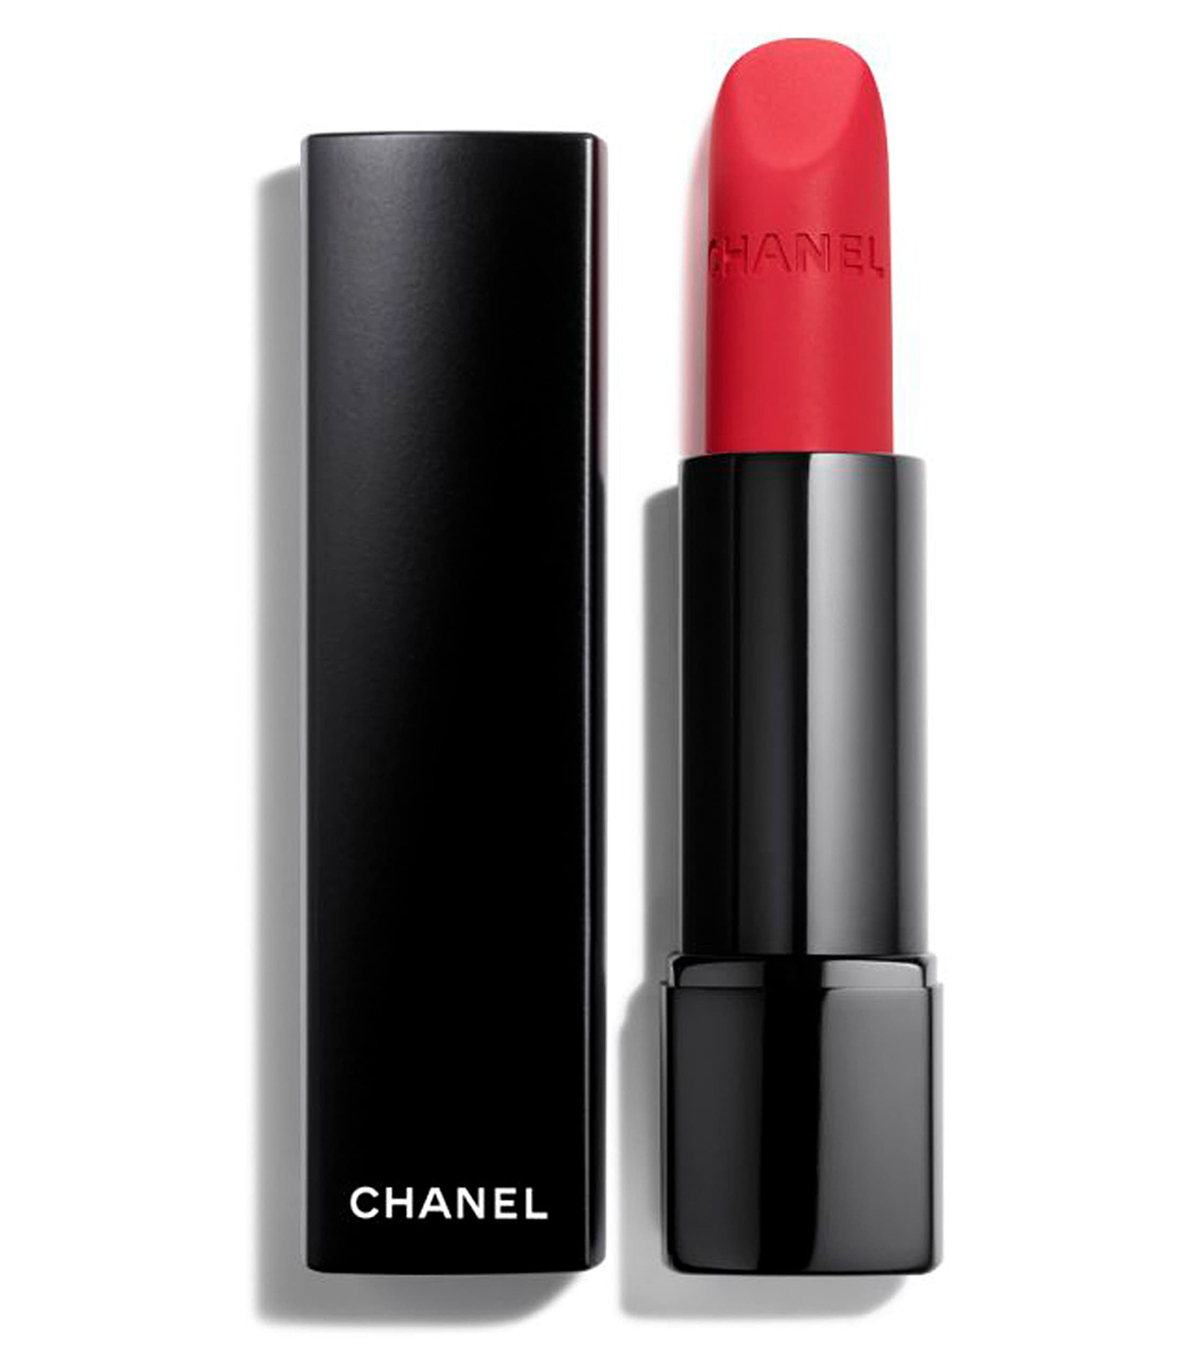 The 11 Best Lipstick Shades, According to Fashion Insiders